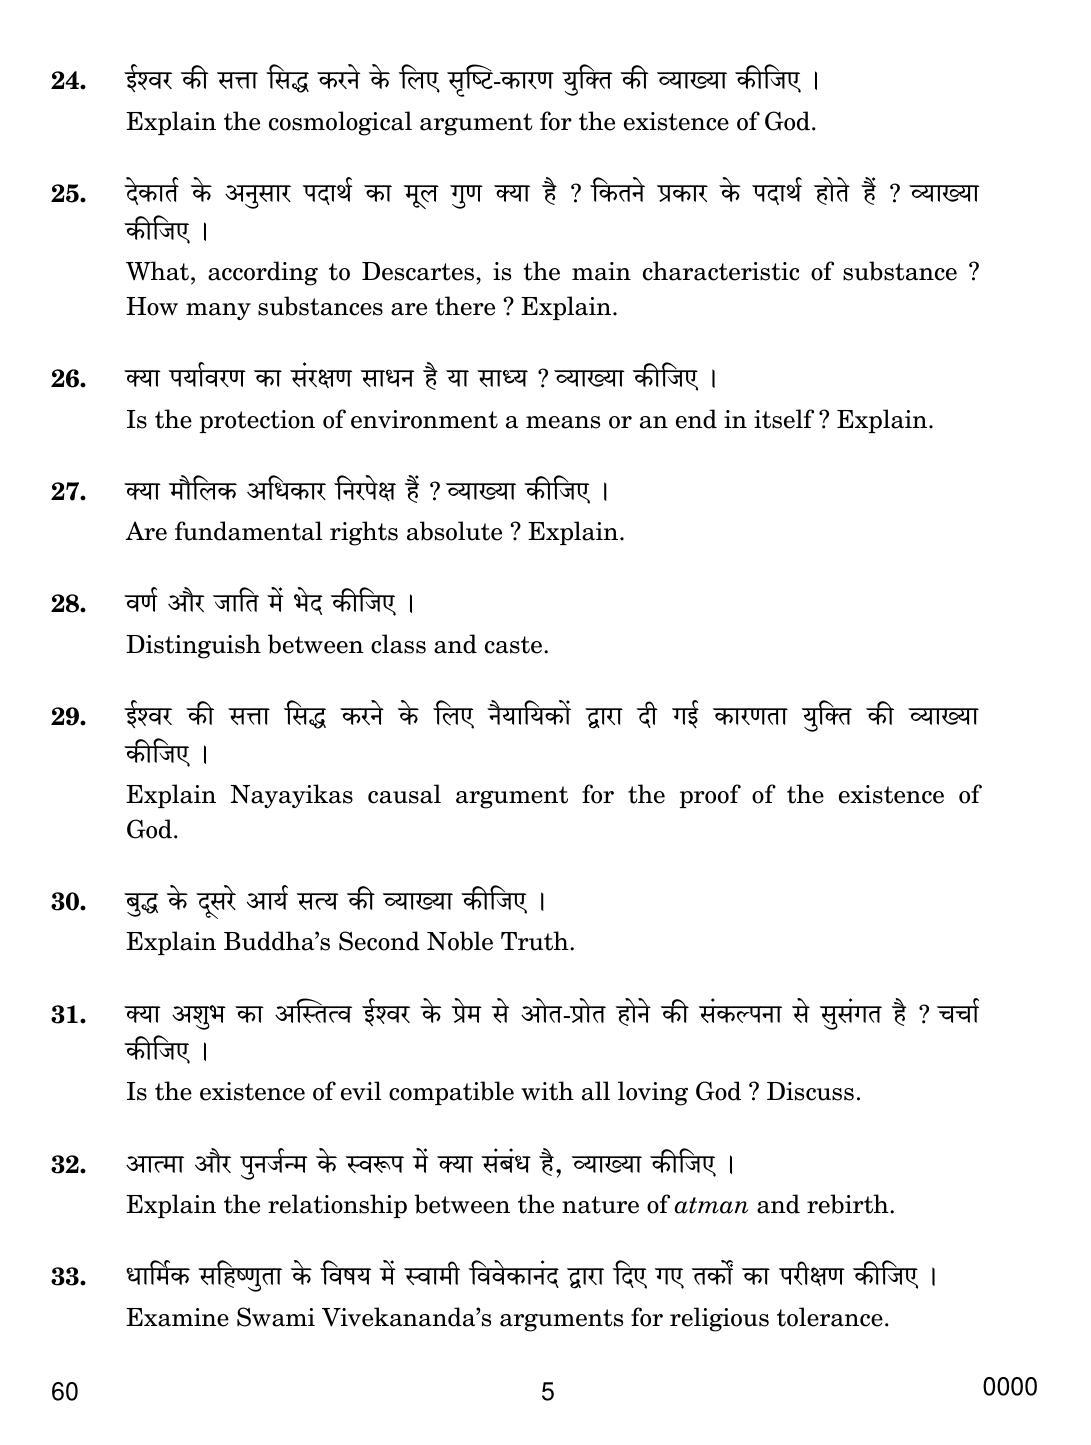 CBSE Class 12 60 Philosophy 2019 Question Paper - Page 5